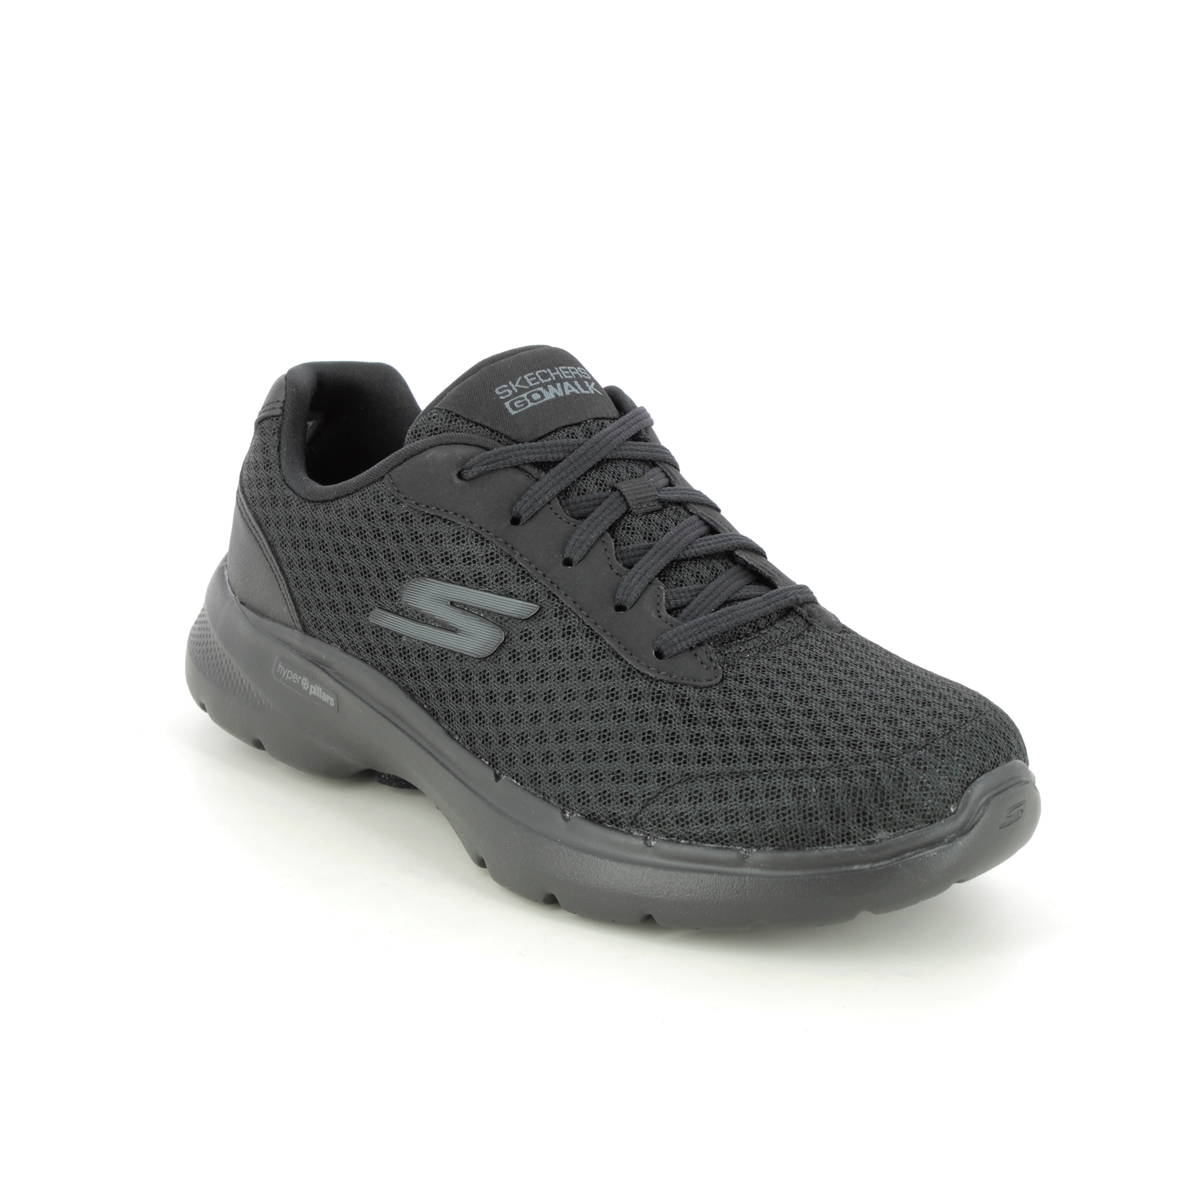 Skechers Go Walk 6 Lace BBK Black Womens trainers 124514 in a Plain Man-made in Size 6